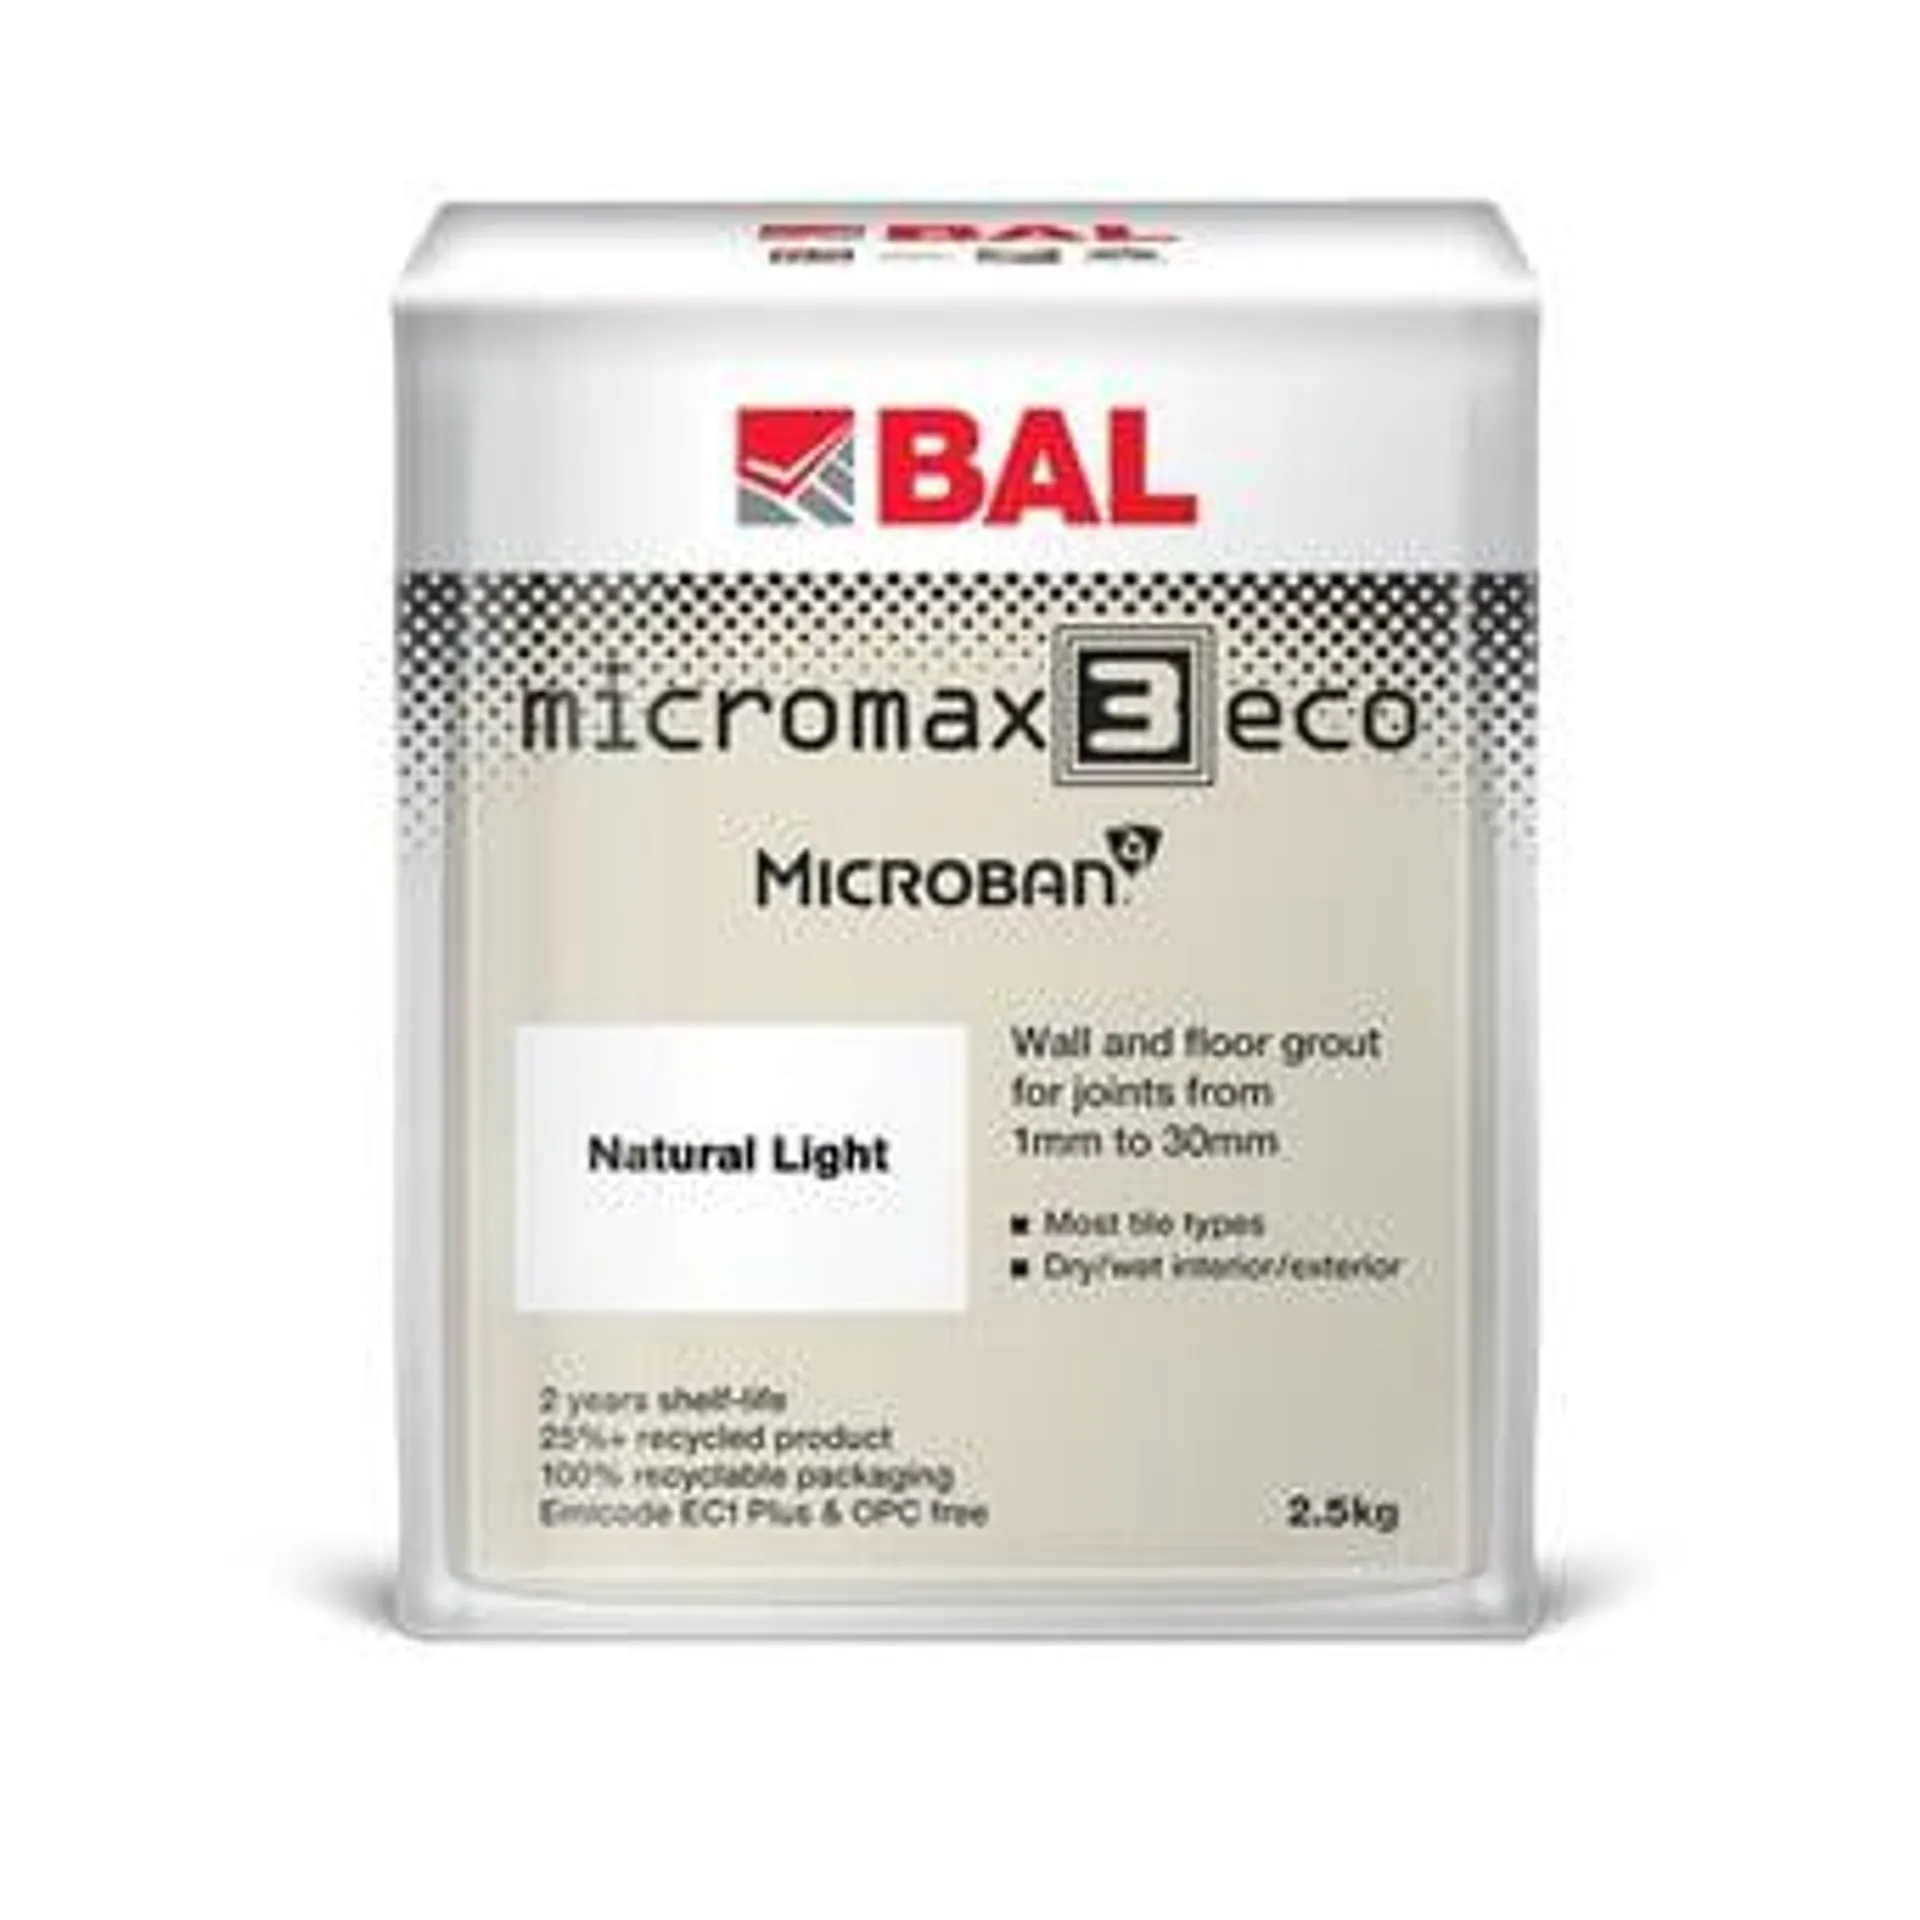 BAL Micromax3 Eco Grout Colour Editions Natural Light 2.5kg